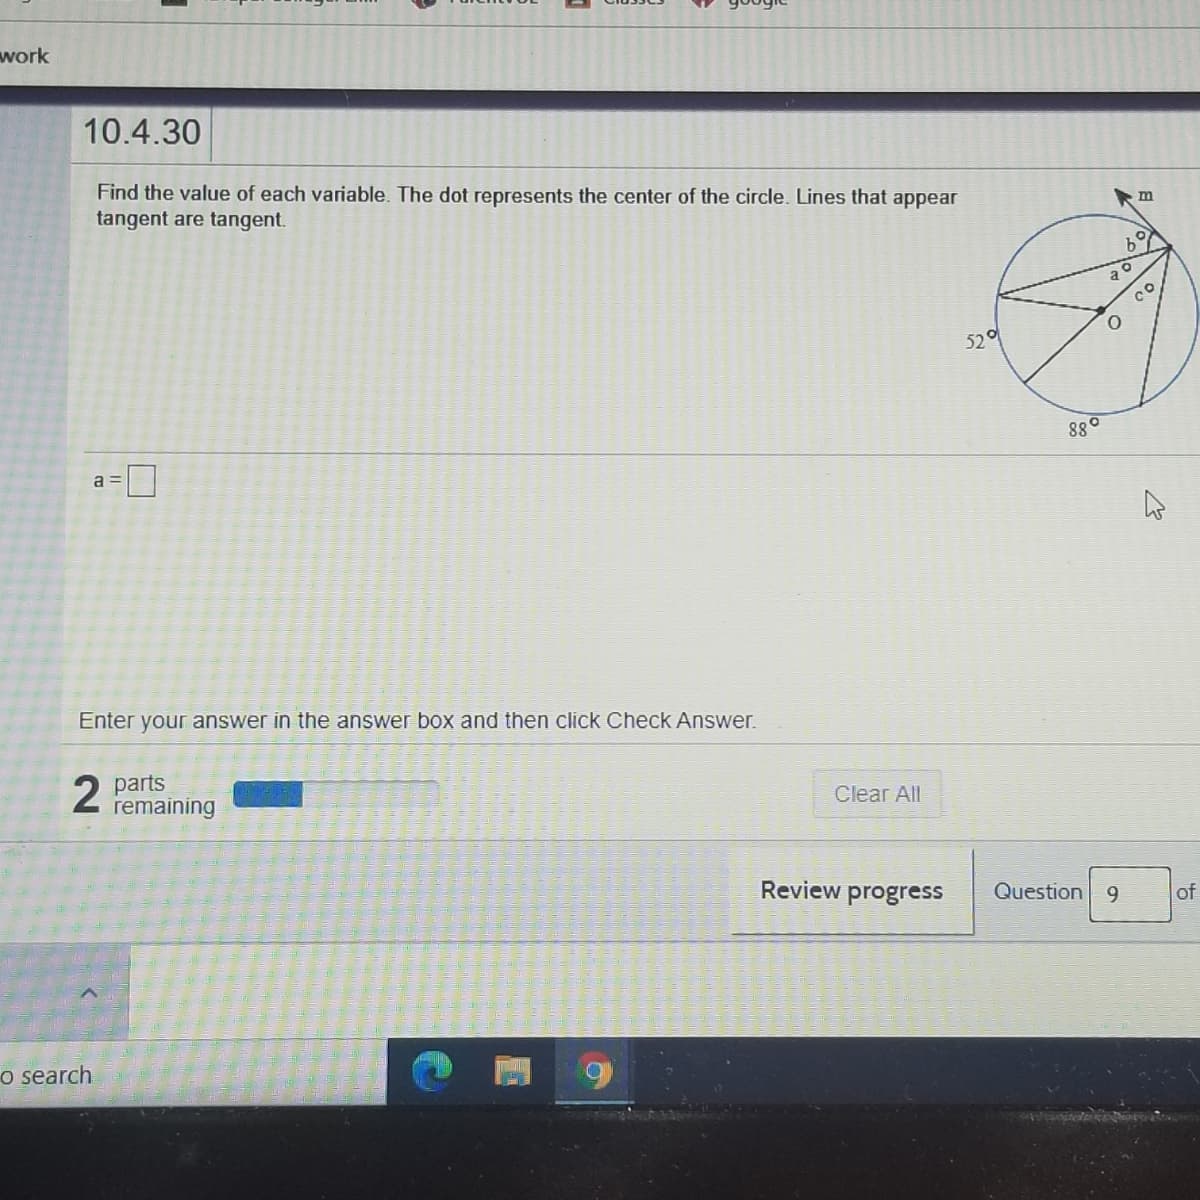 work
10.4.30
Find the value of each variable. The dot represents the center of the circle. Lines that appear
tangent are tangent.
b°
52
880
a =
Enter your answer in the answer box and then click Check Answer.
2 parts
remaining
Clear All
Review progress
Question 9
of
o search
